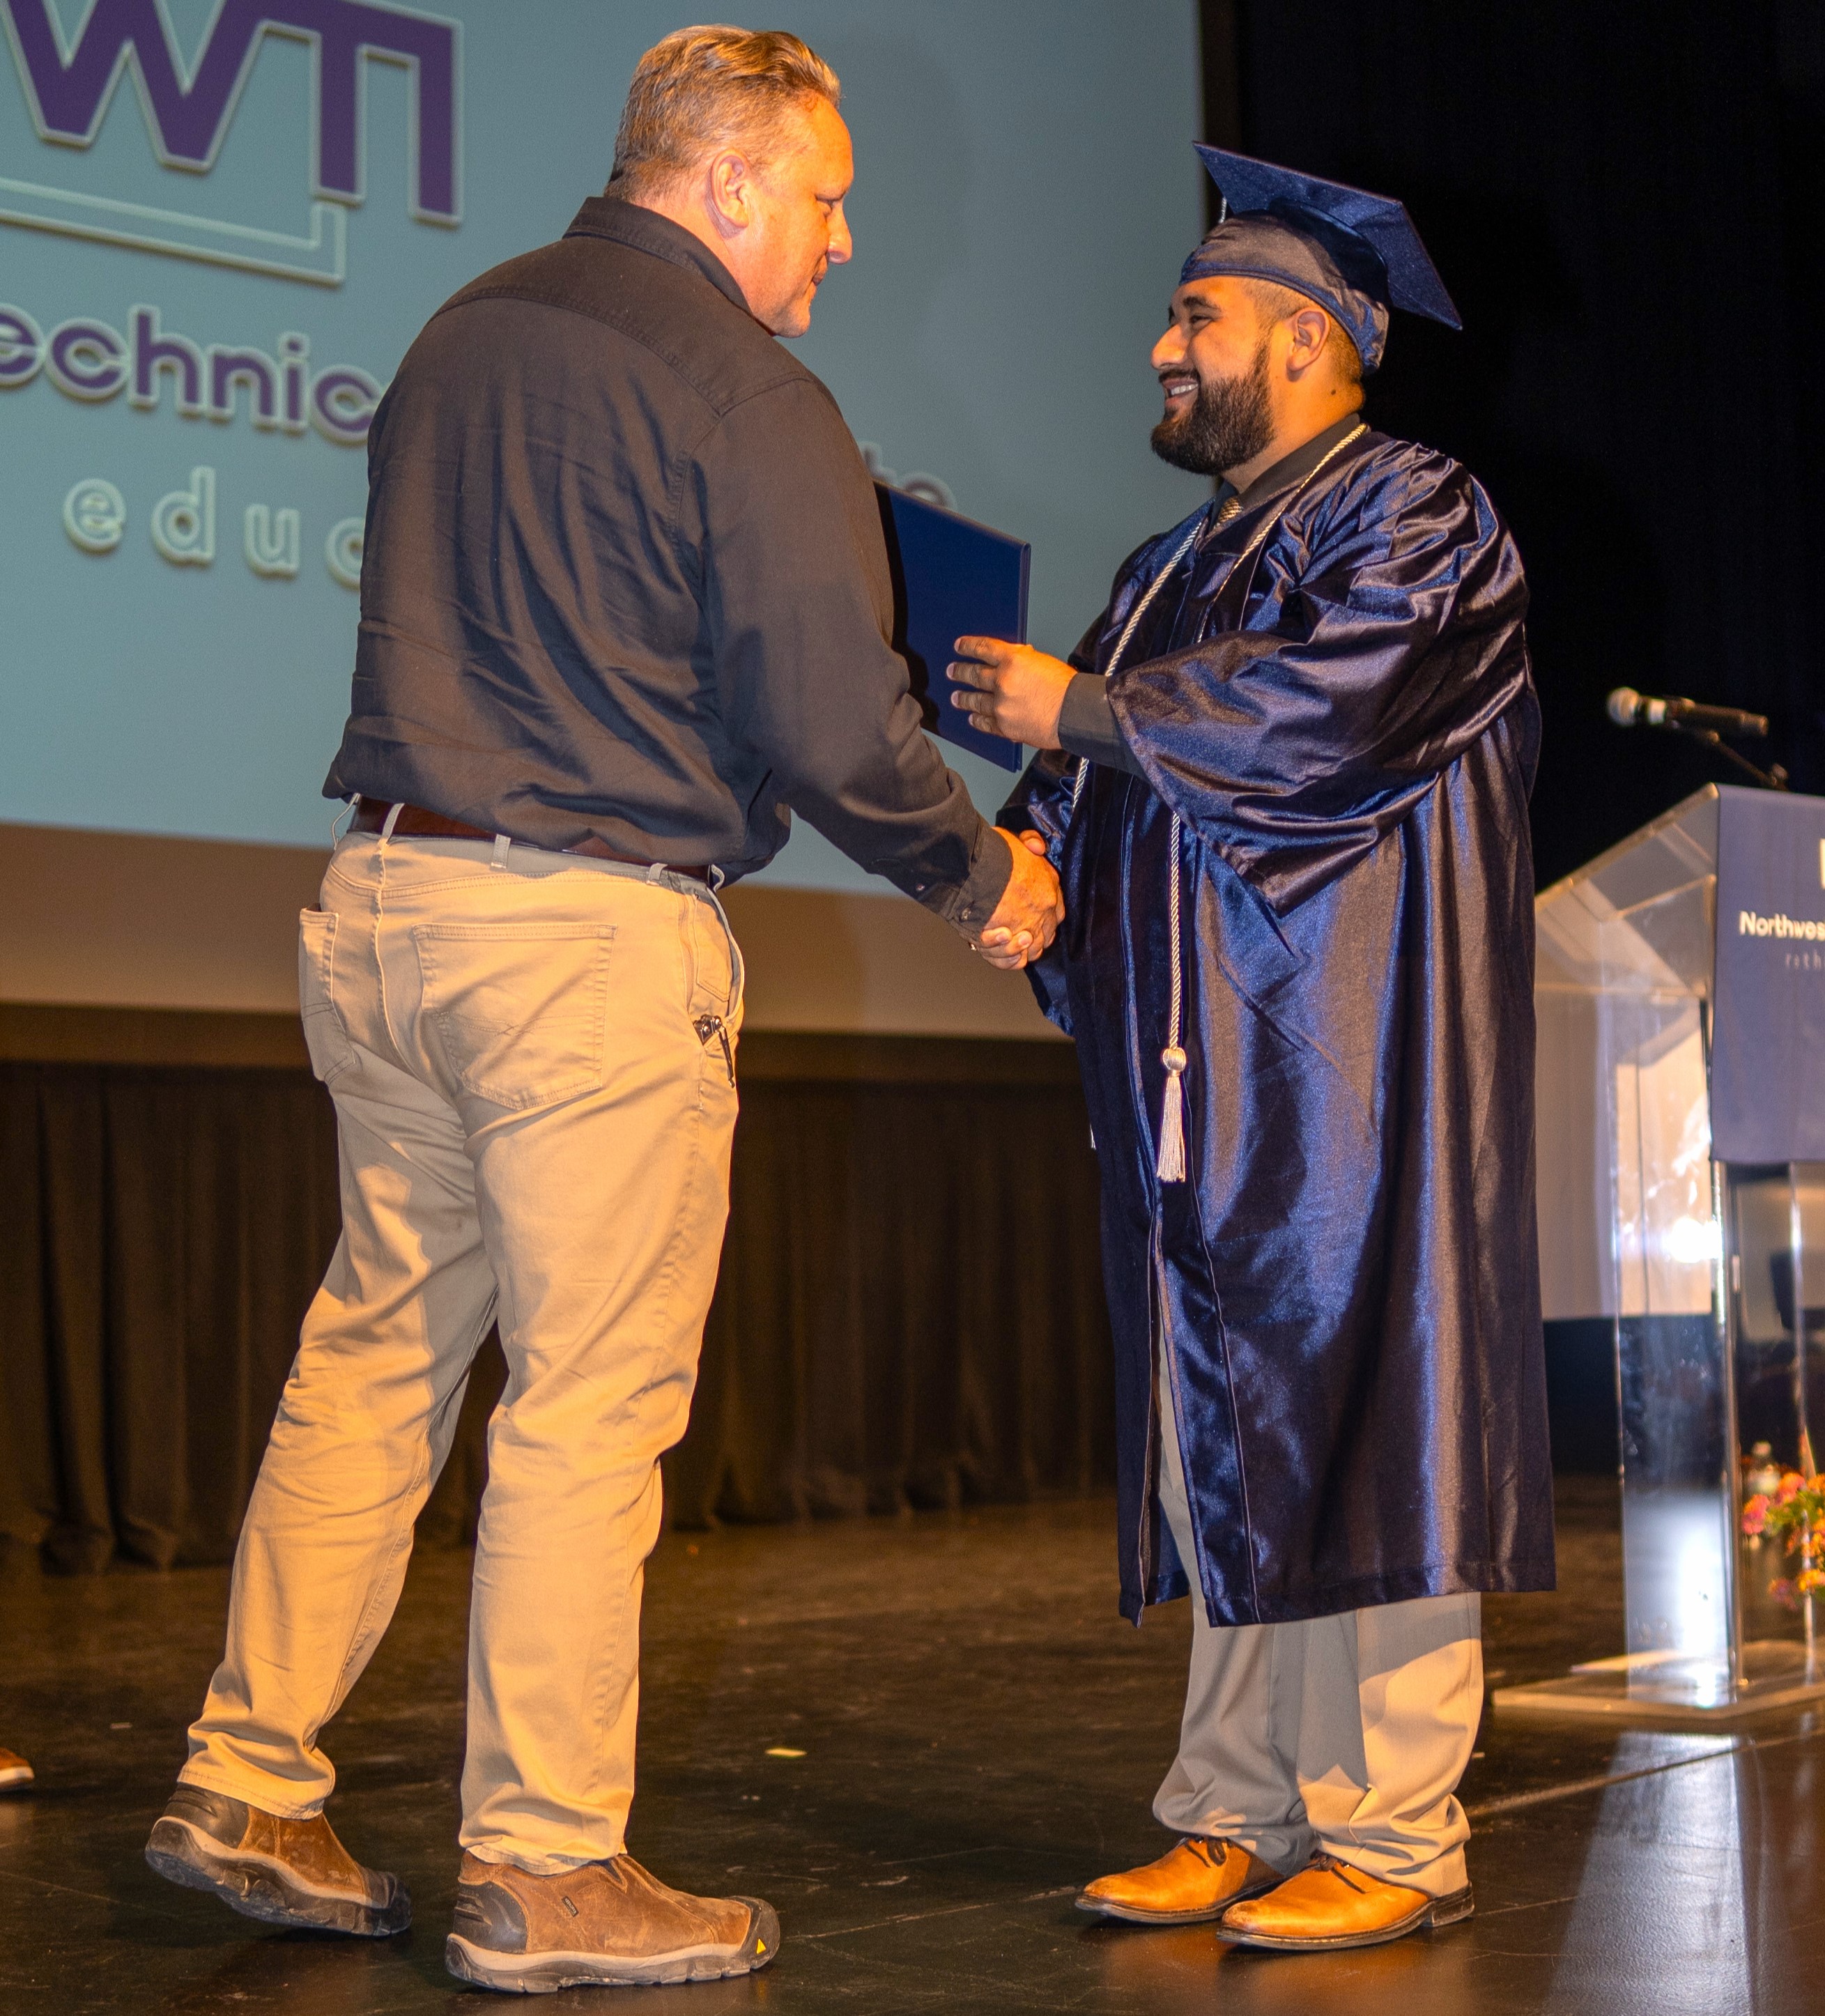 board member shakes hands with a graduate